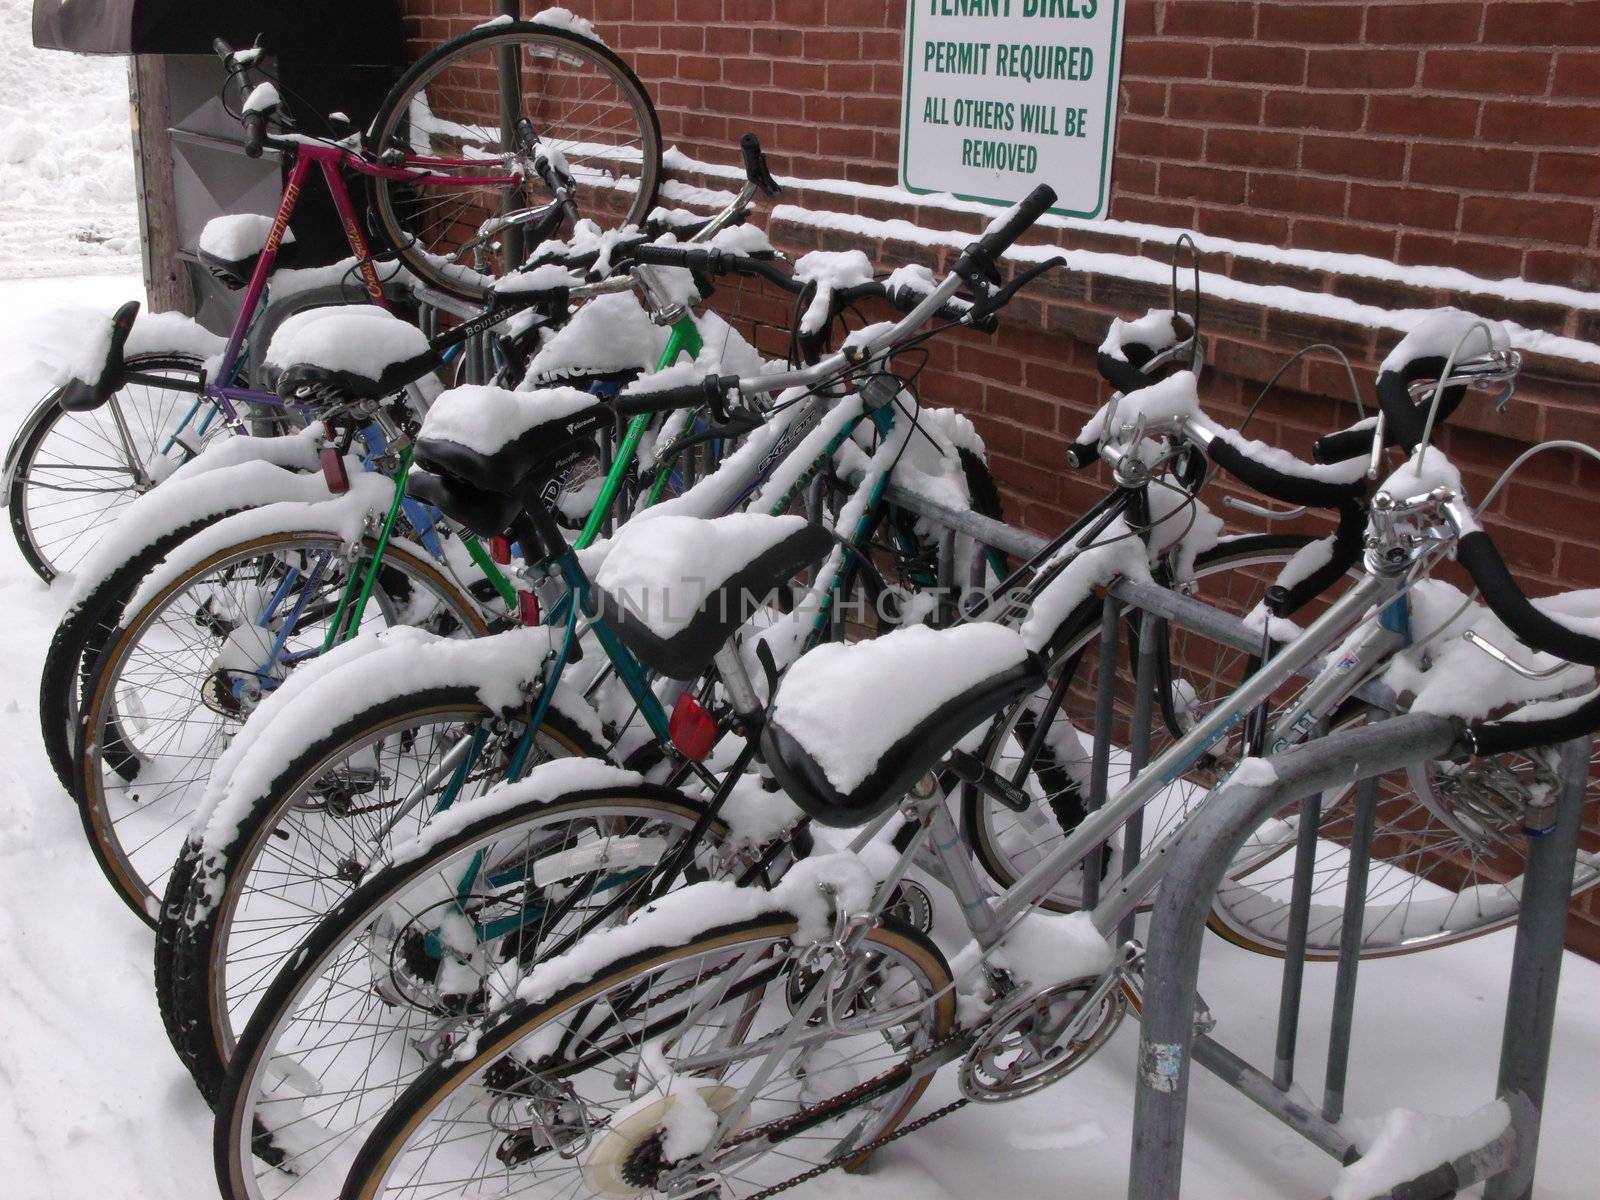 Bikes parked together in a grouping with snow covering each one and some tilted in peculiar angles.